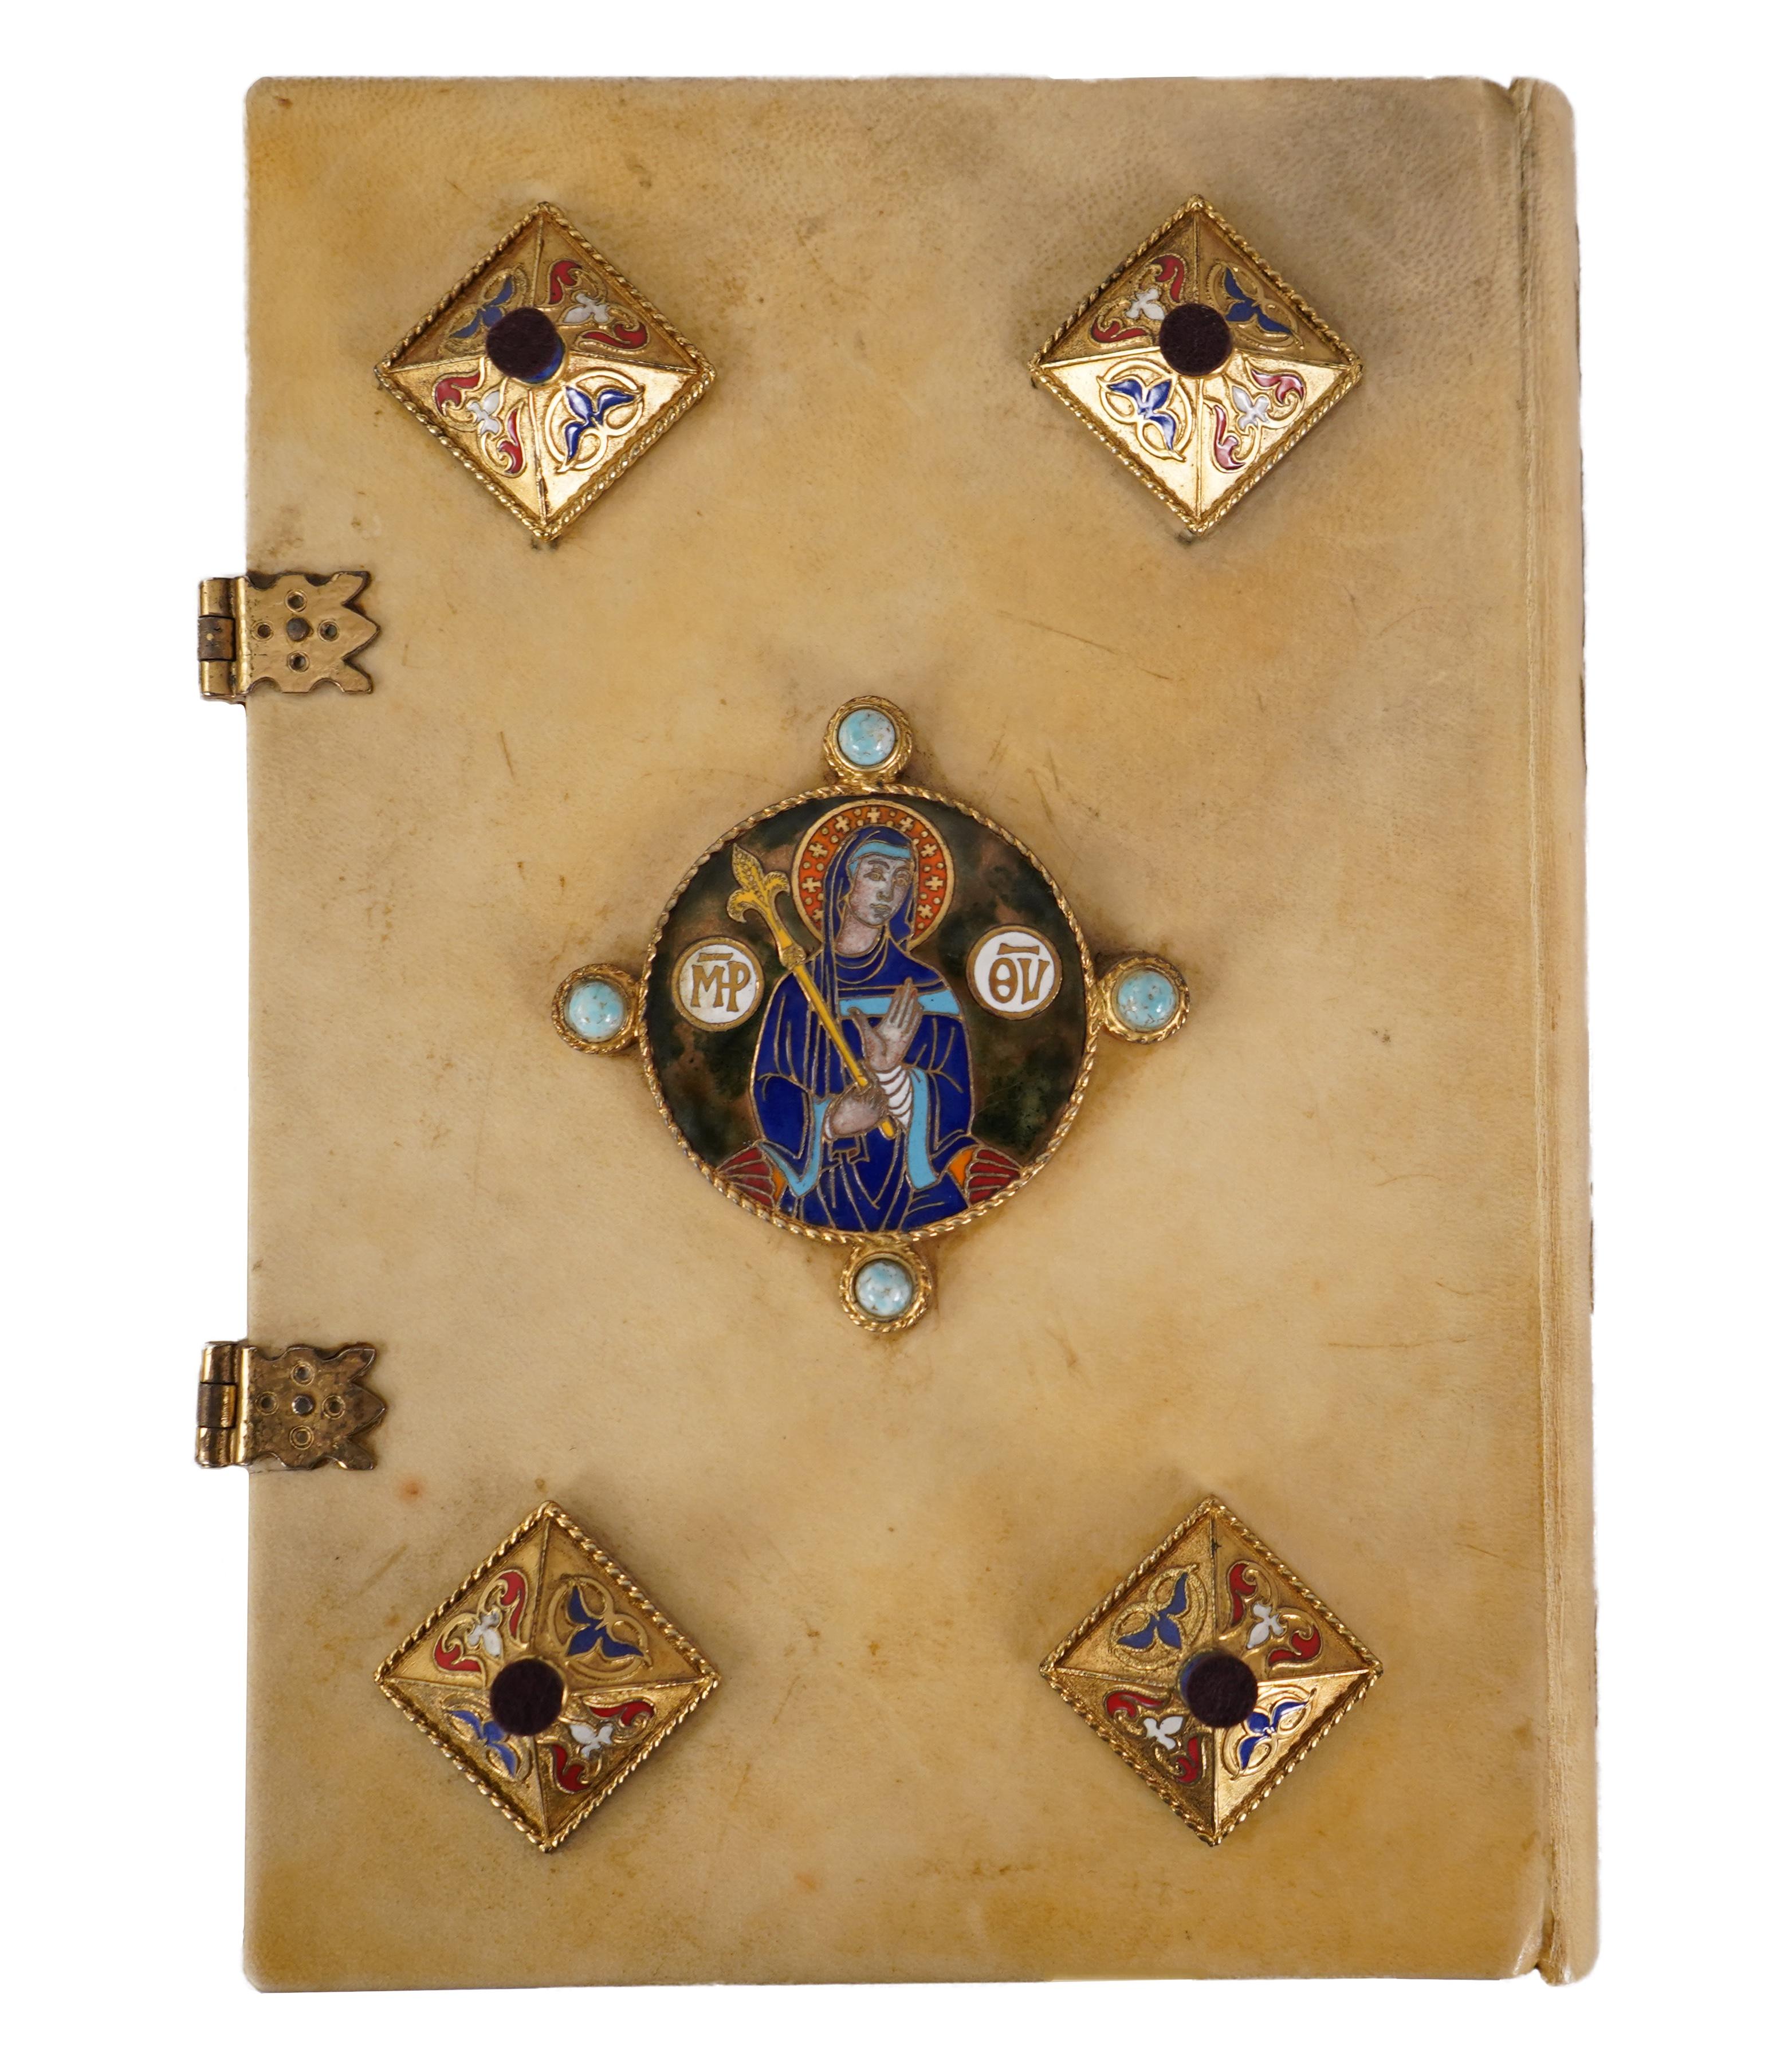 Comprising a finely crafted and highly ornate vellum enameled and cabochon decorated bible cover. The front cover mounted with a rectangular enameled plaque of Christ bordered in pearls and the corners with cabochons. Surrounding Christ are four